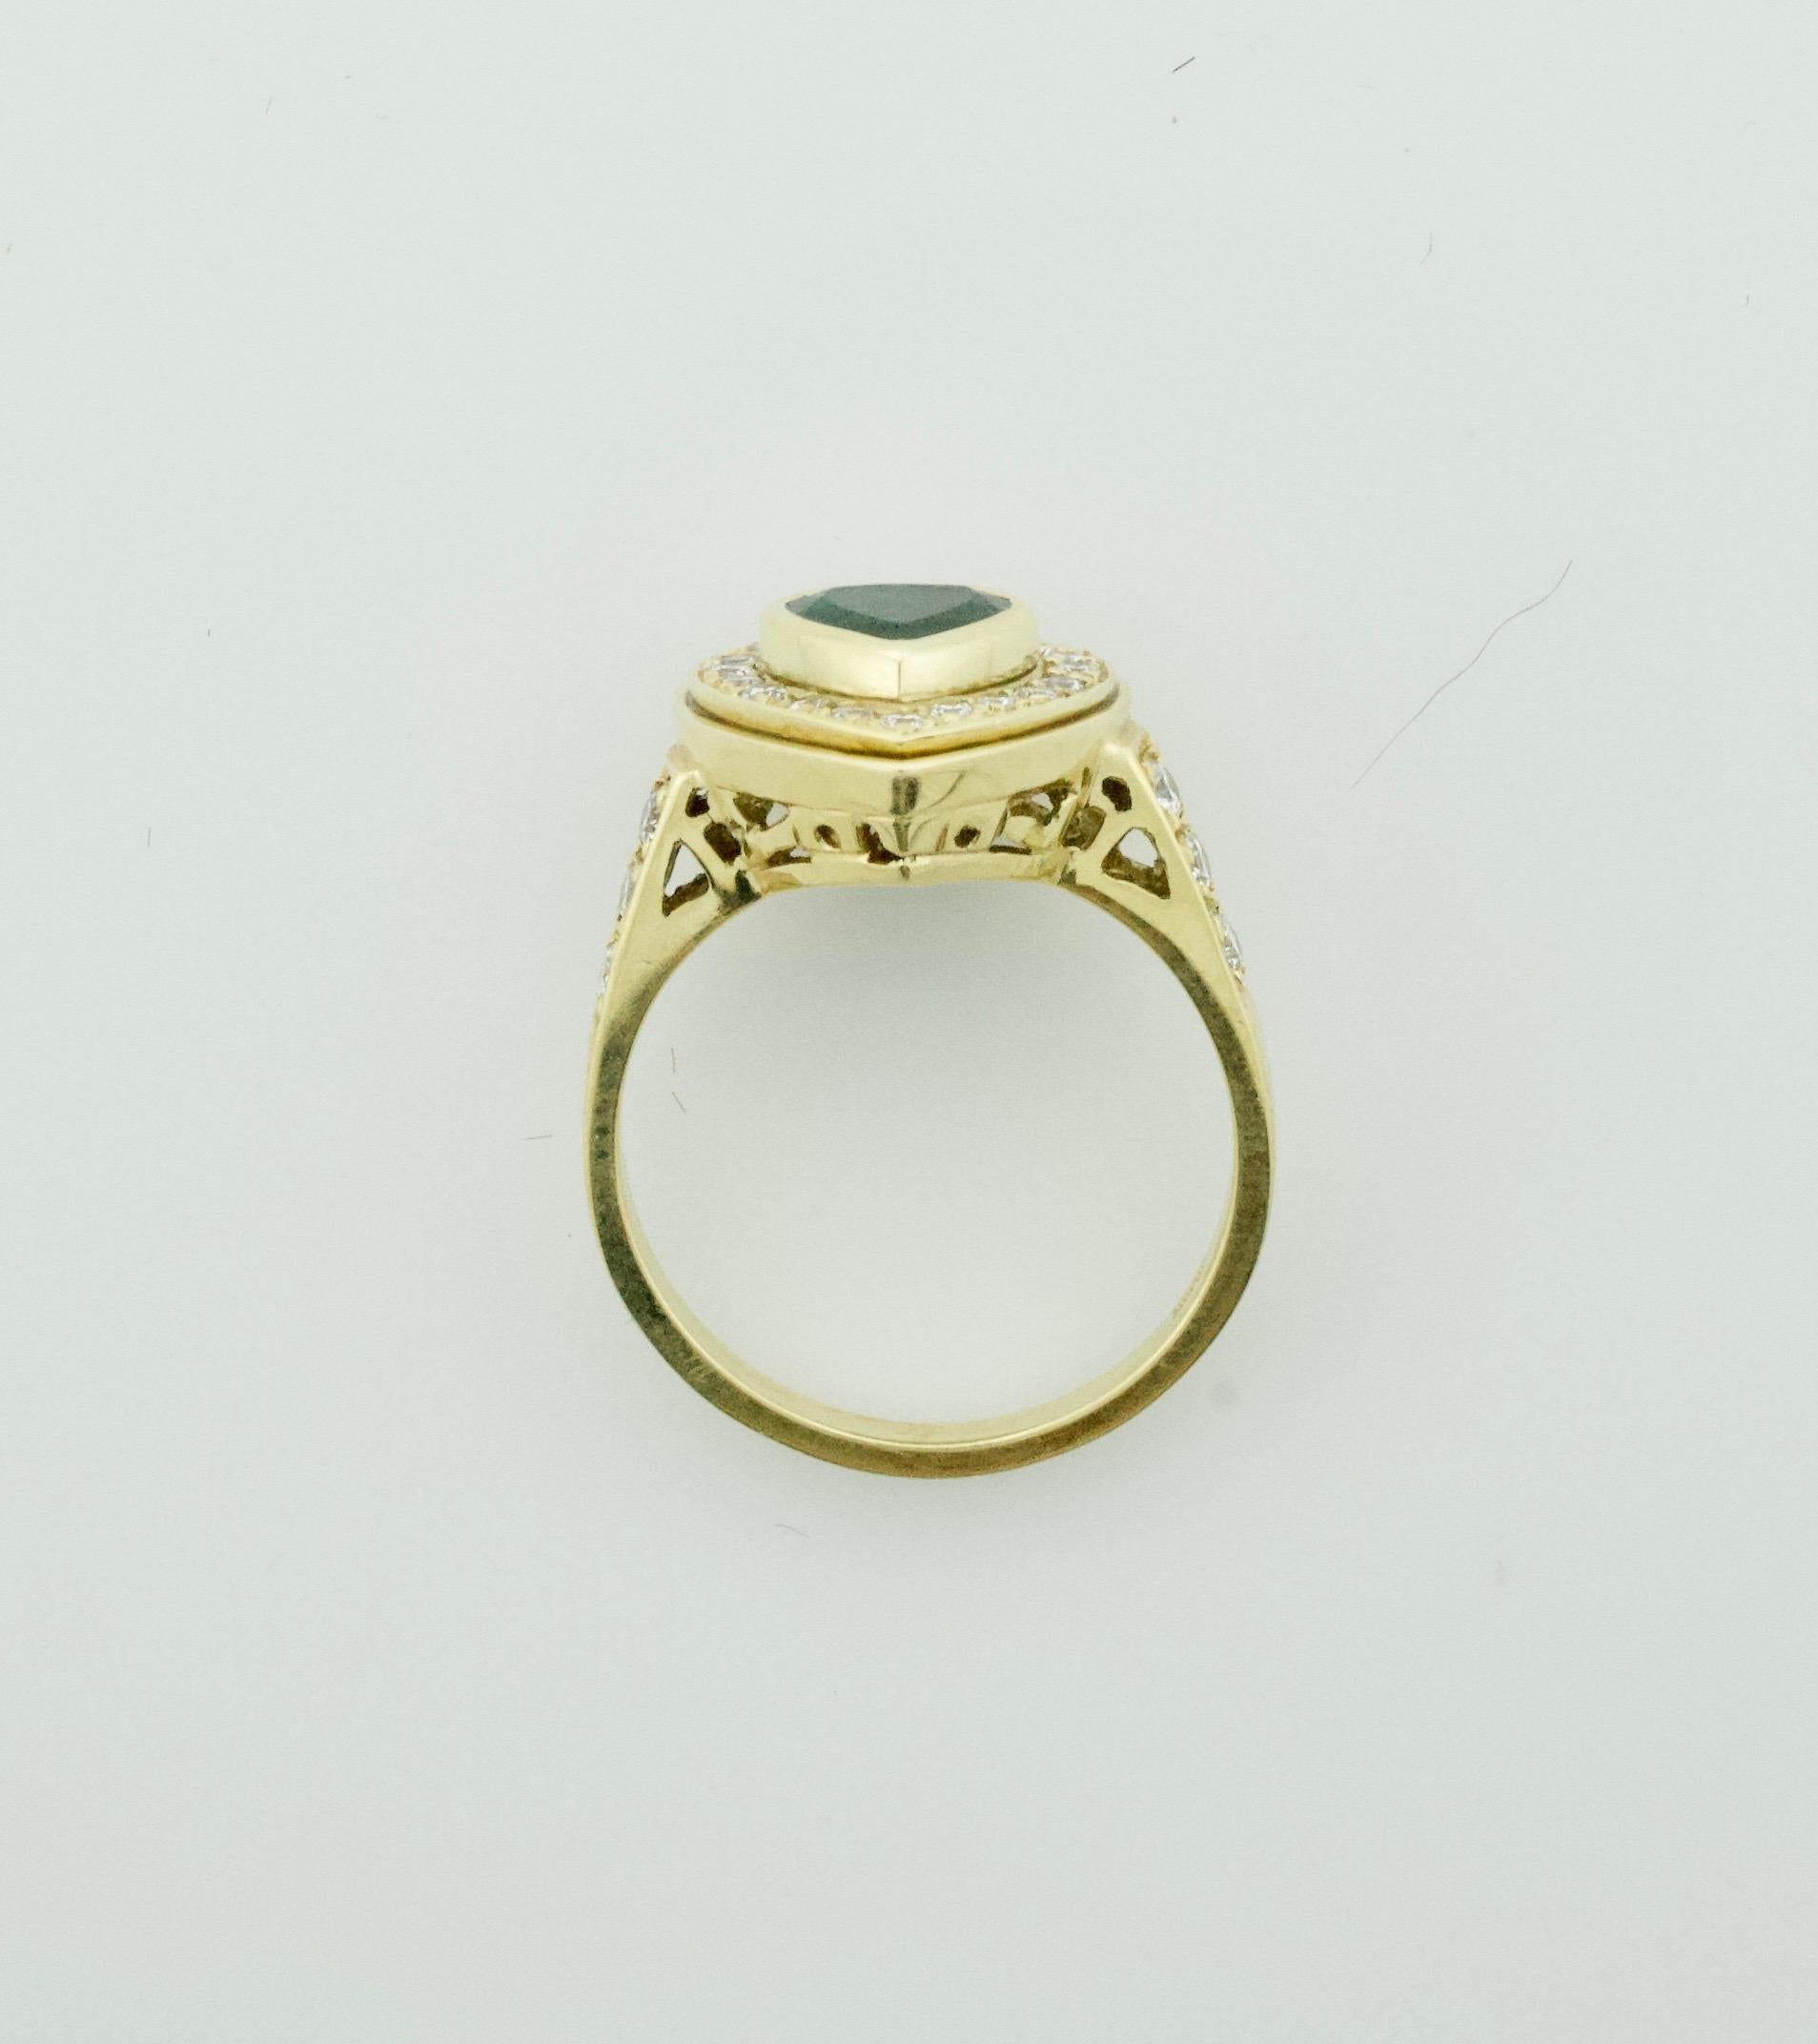 Heart Shaped Emerald and Diamond Ring in 18k Yellow Gold
Simple and Sweet for You or Your Sweet
One Heart Shape Emerald Weighing .72 Carats 
Twenty Three Round Brilliant Cut Diamonds Weighing .62 Carats 
Currently Size 6.5 Can Be Sized By Us Or Your